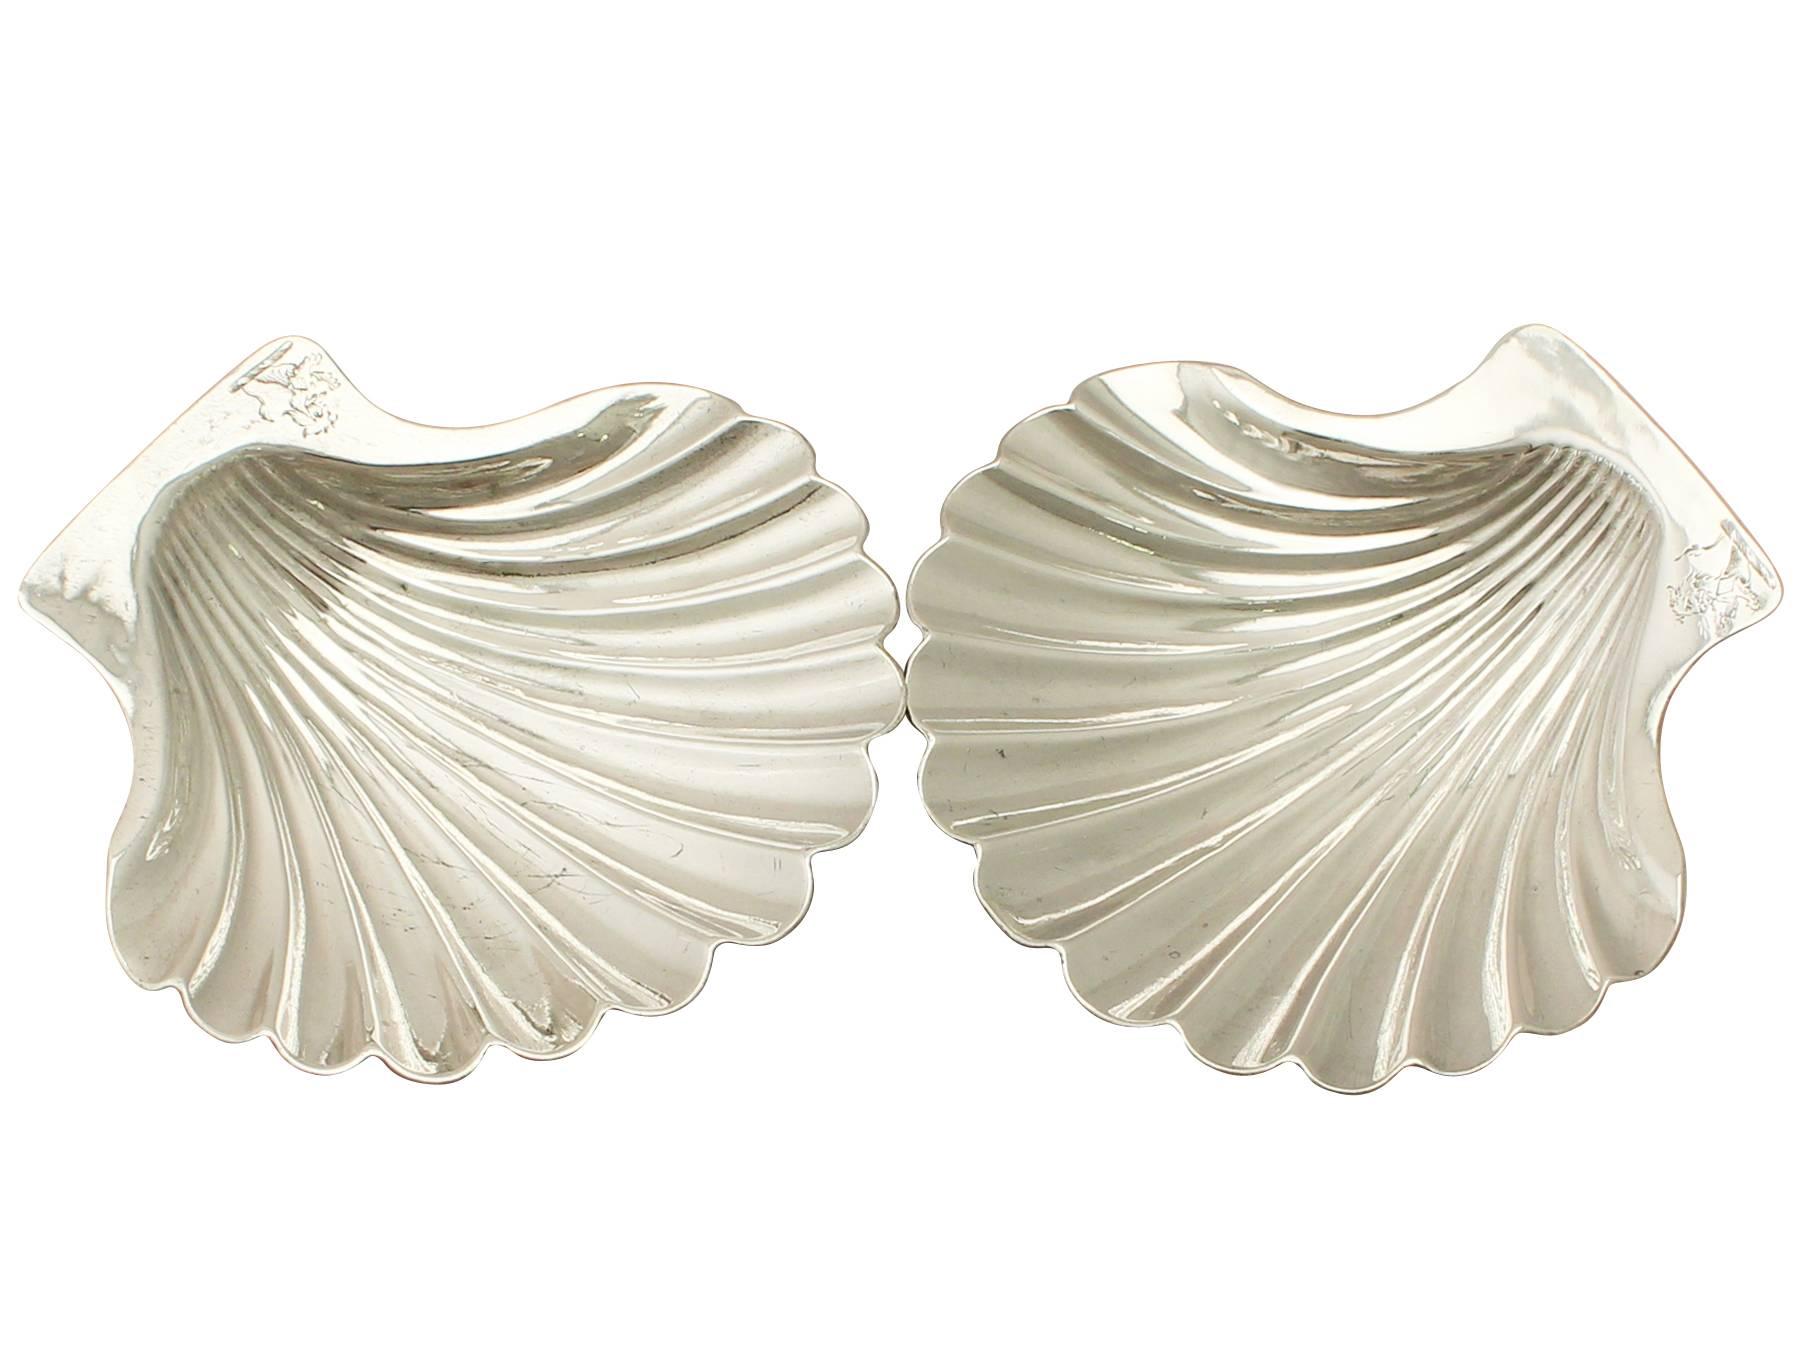 A fine and impressive pair of antique Georgian English sterling silver butter shells/dishes; an addition to our dining silverware collection.

These fine antique George III sterling silver butter dishes have a plain scallop shell shaped